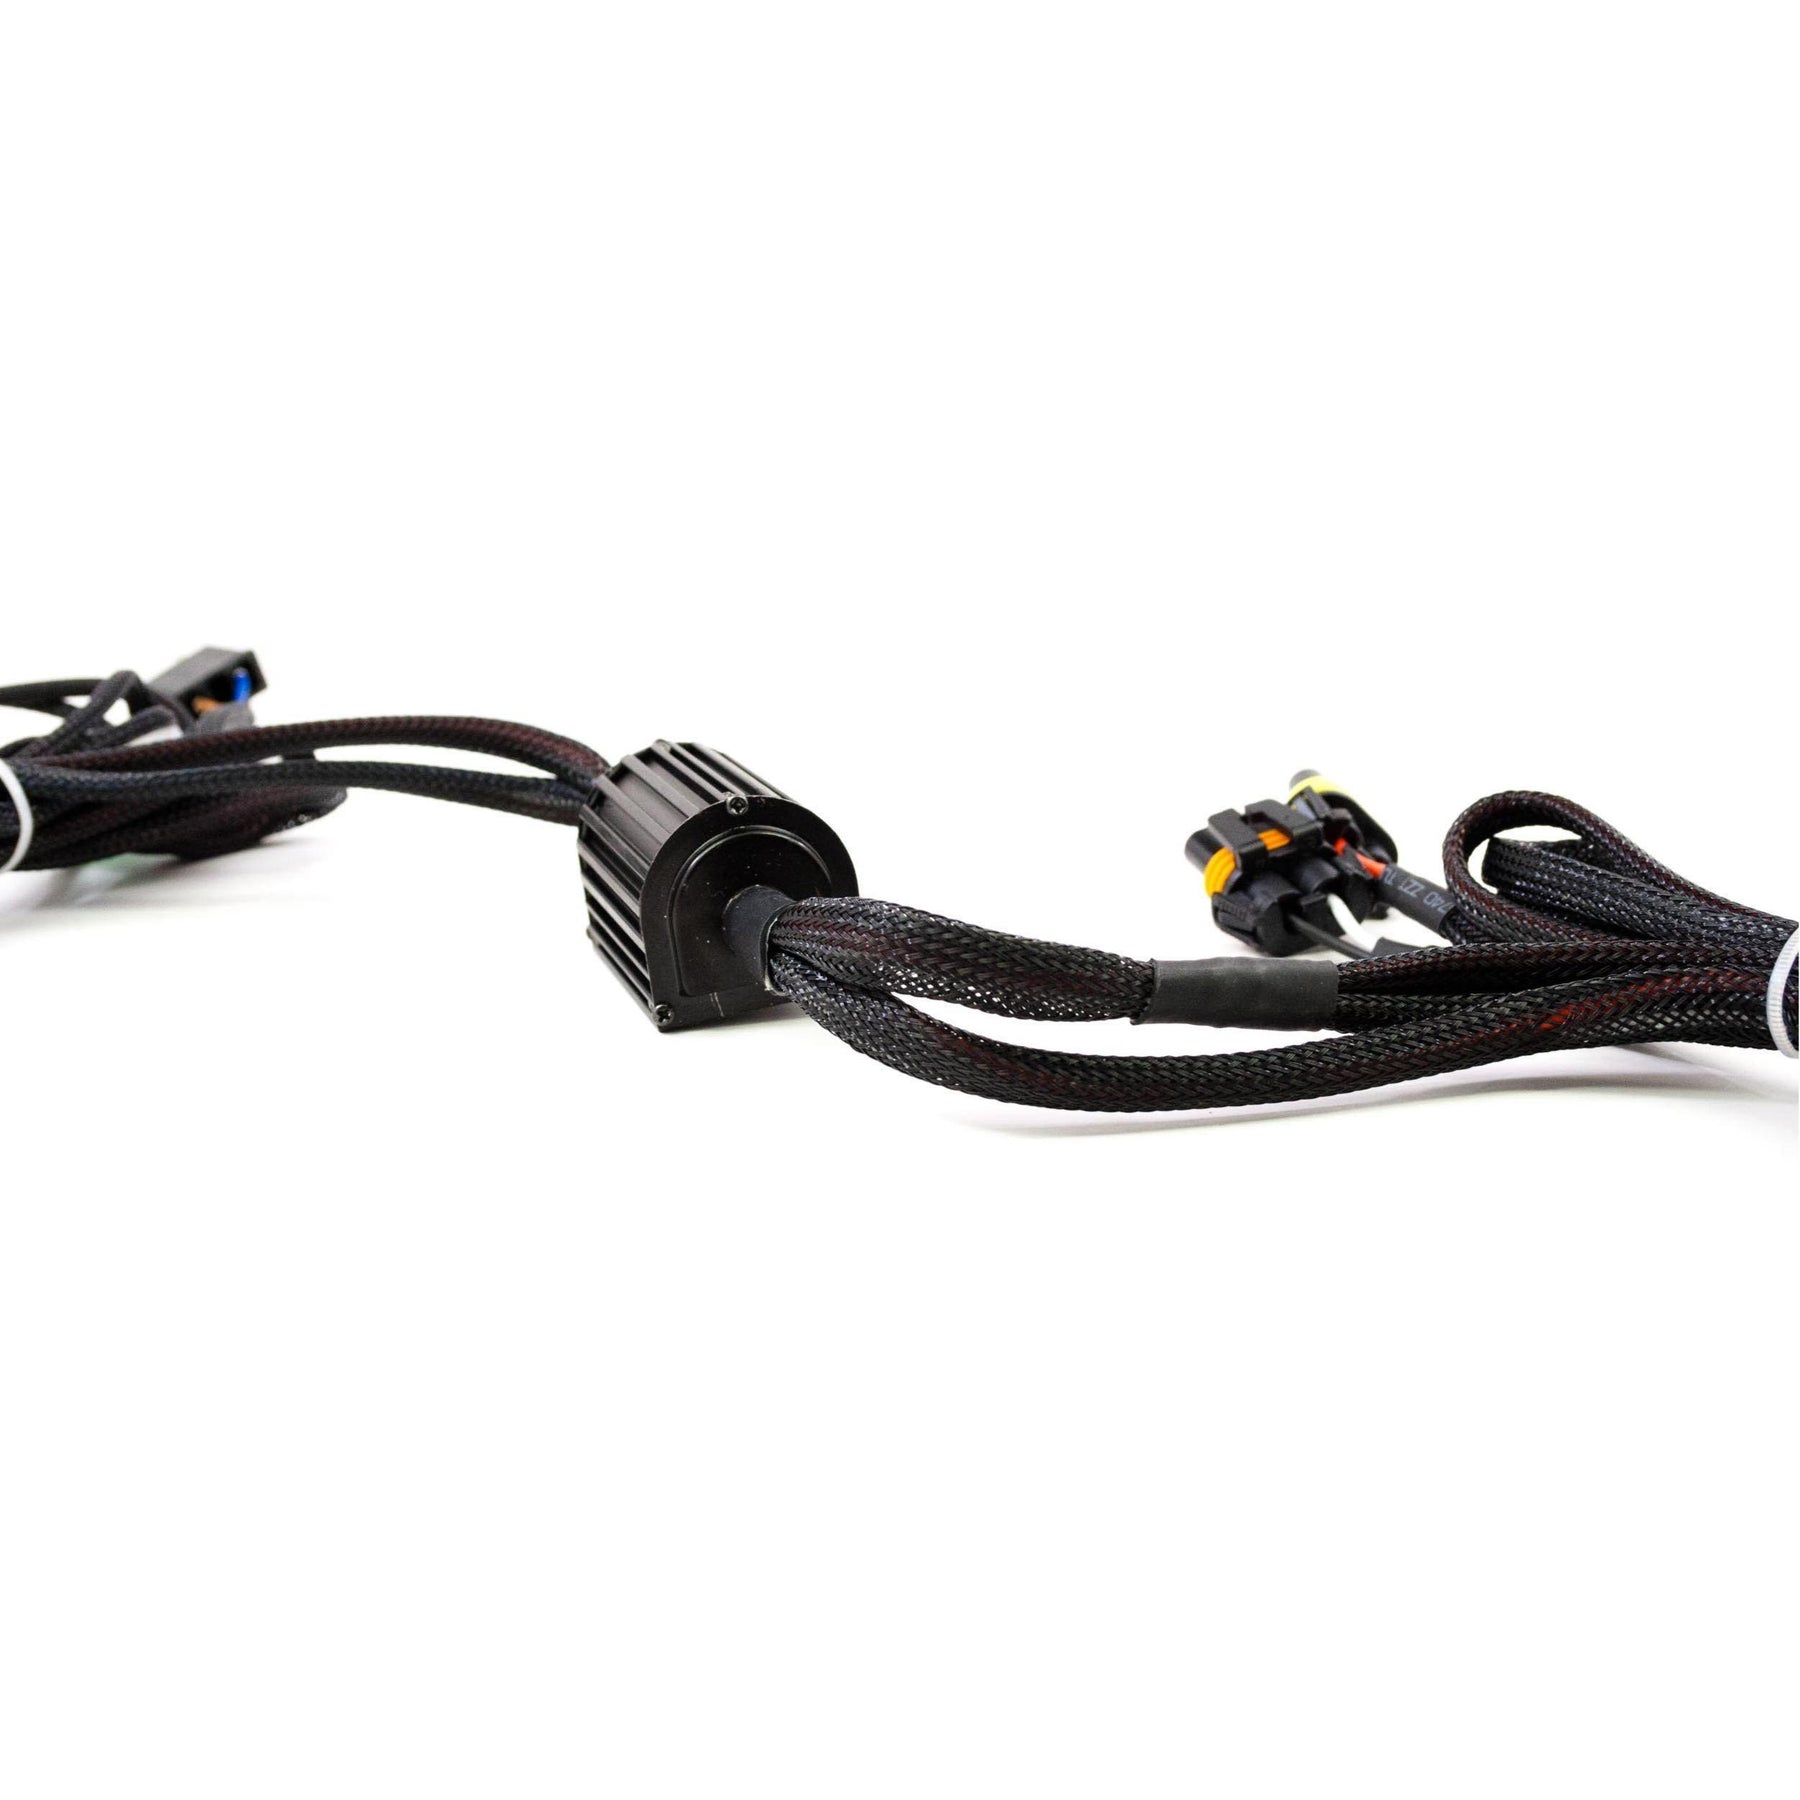 H4 Motorcycle Dual Output HID Harness (H181)-Lighting Harness-Morimoto-H181-Dirty Diesel Customs